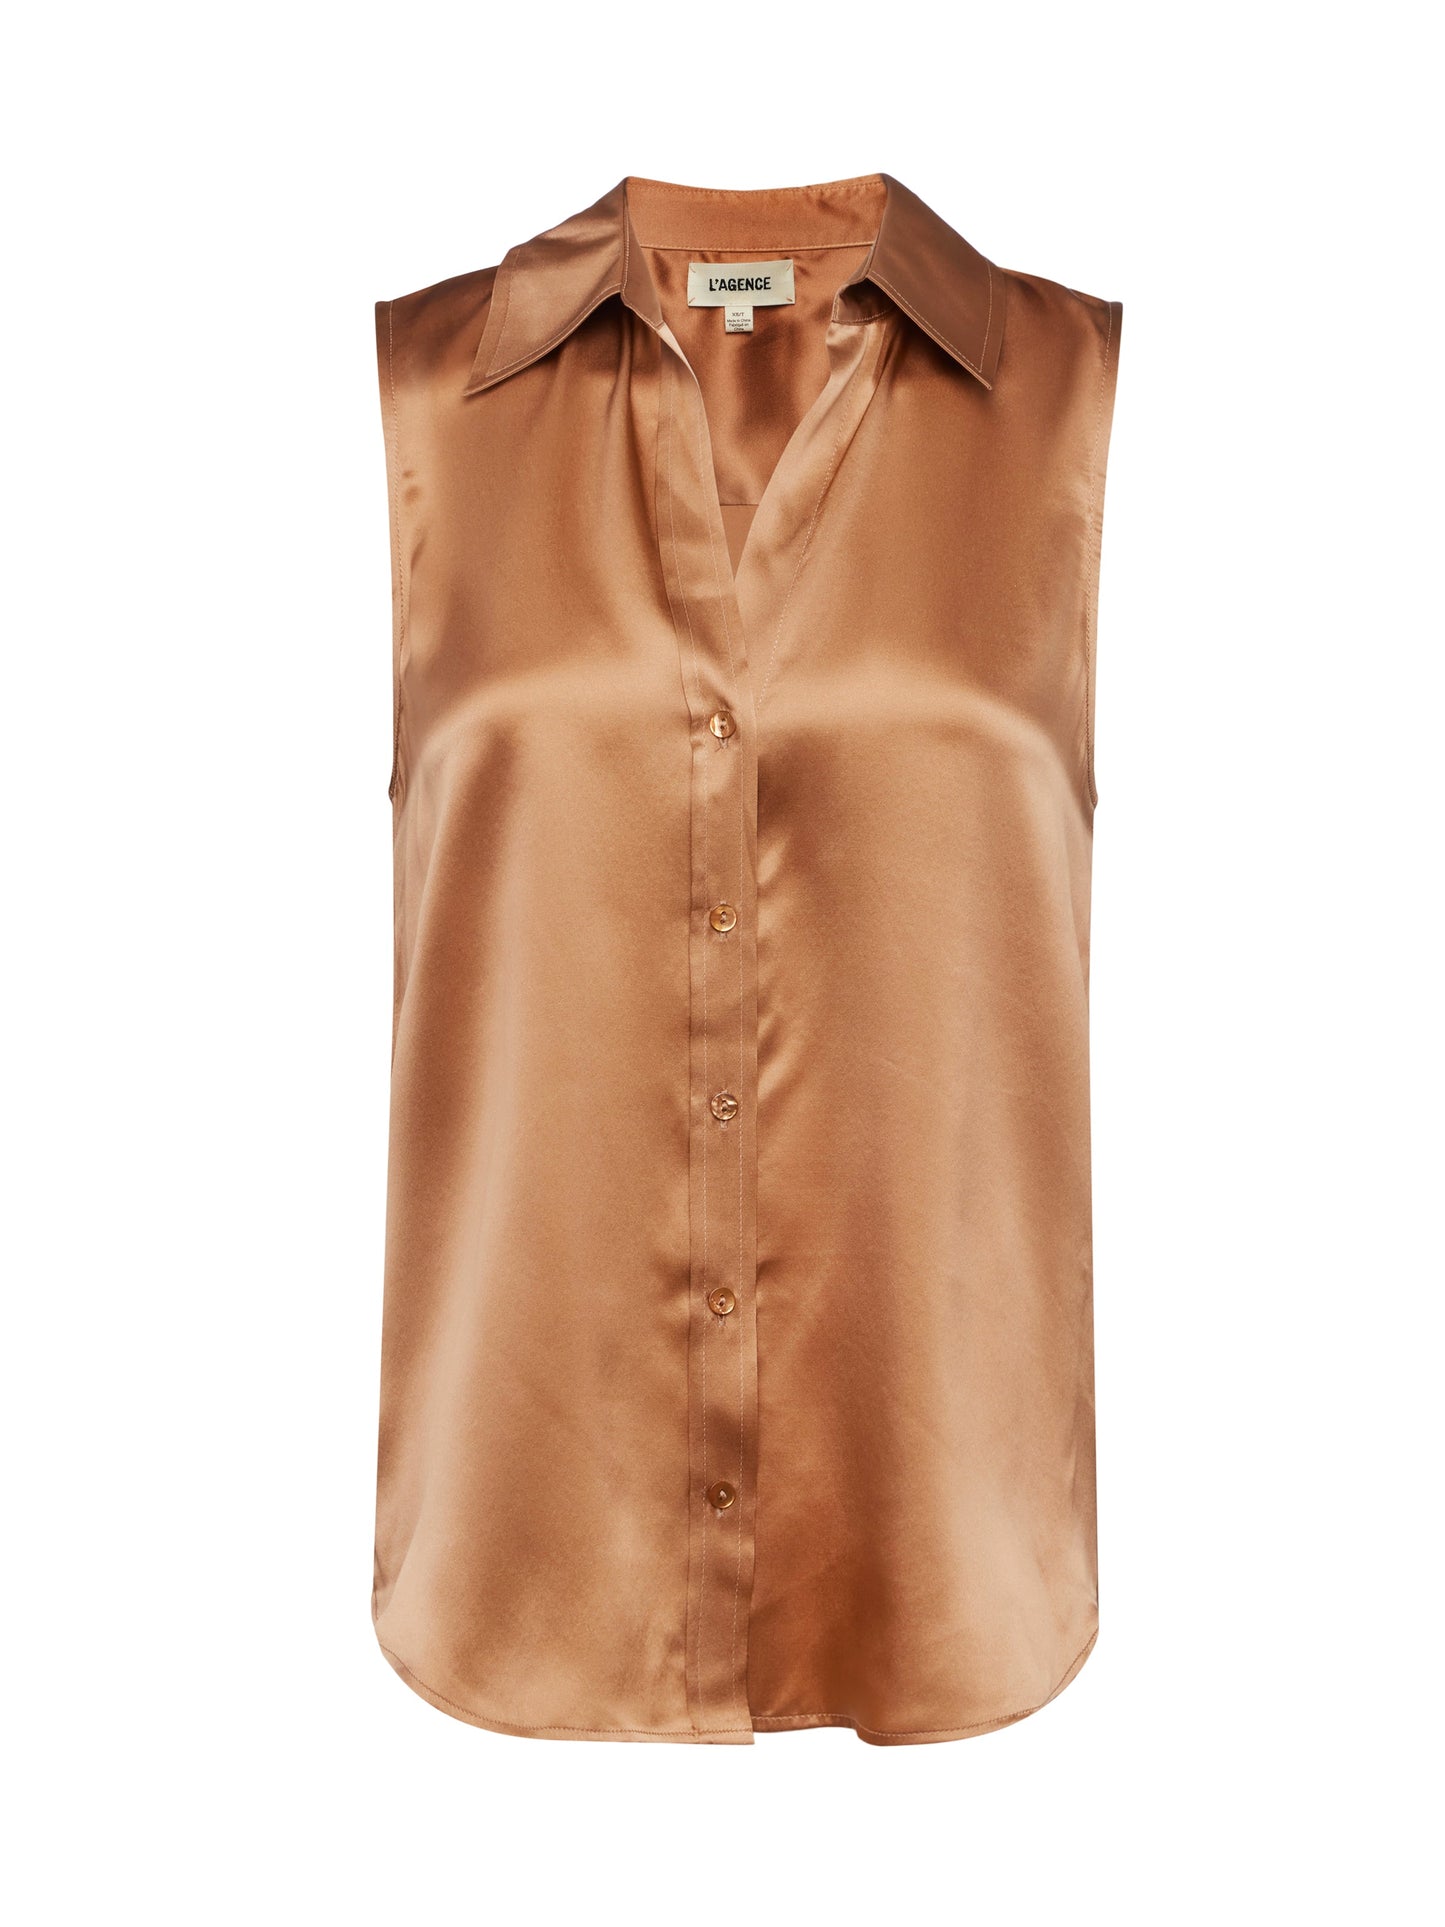 Emmy Blouse Macaroon - L'AGENCE